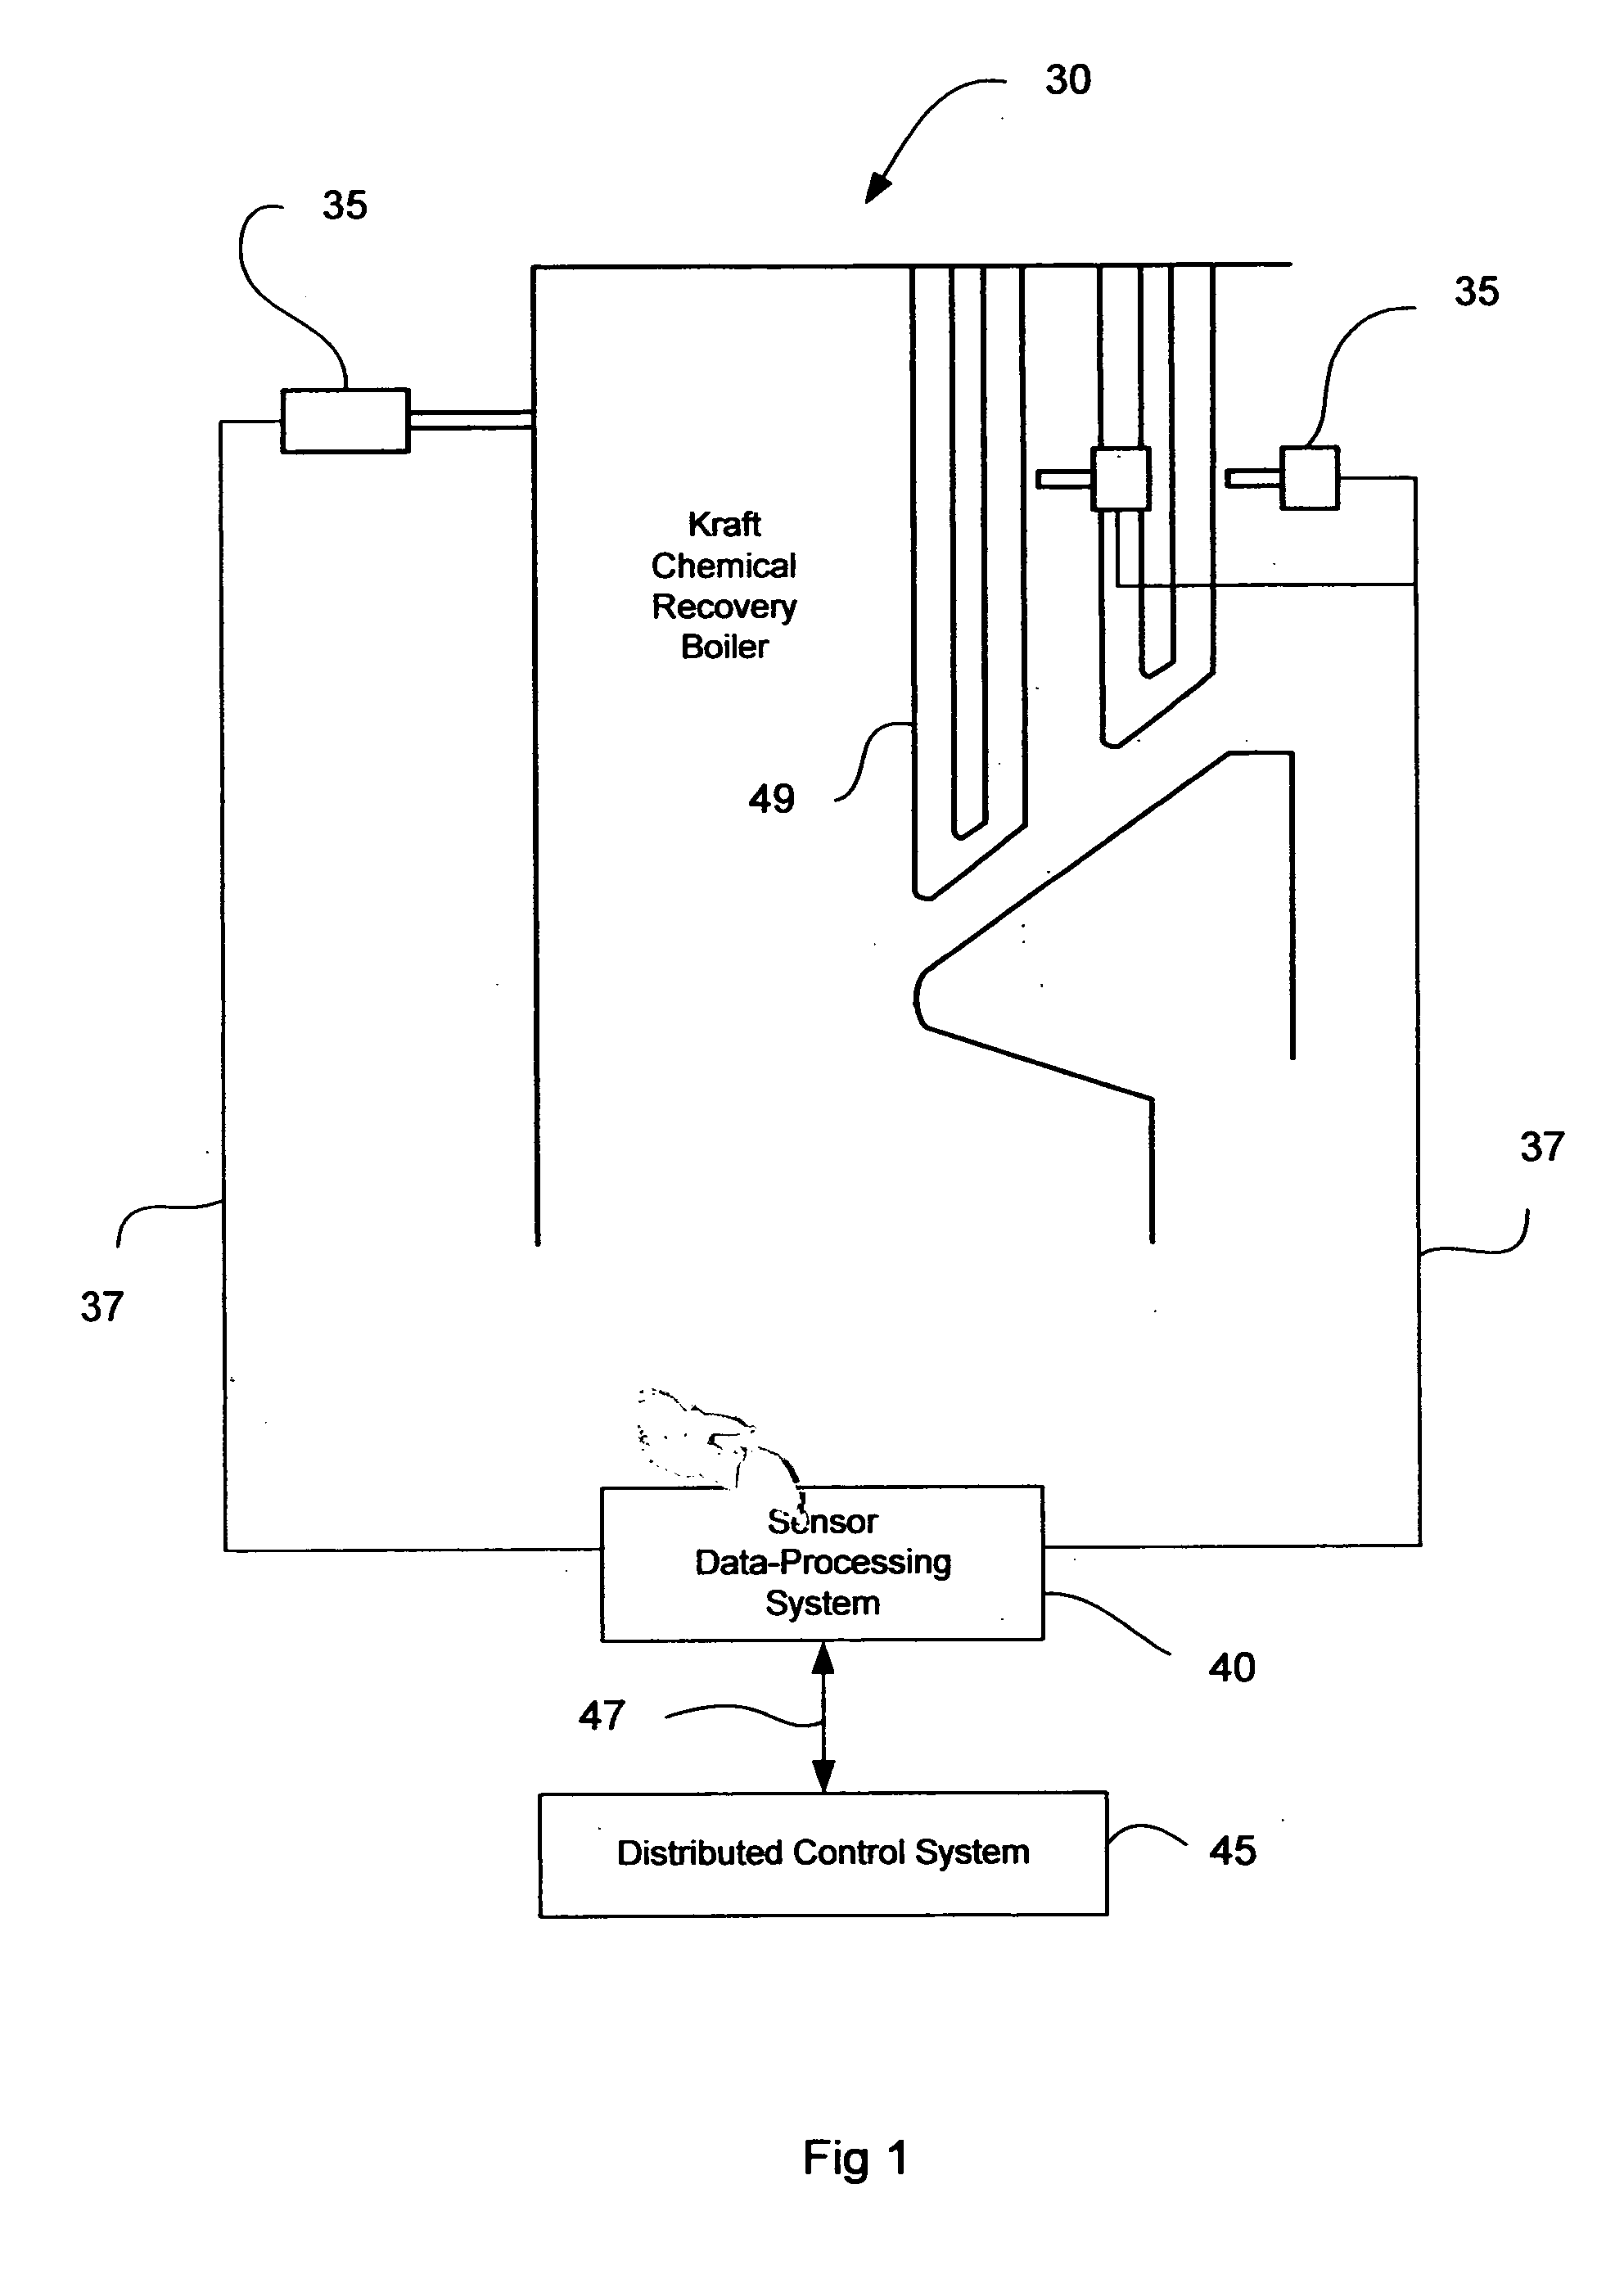 Sensing system for detection and control of deposition on pendant tubes in recovery and power boilers